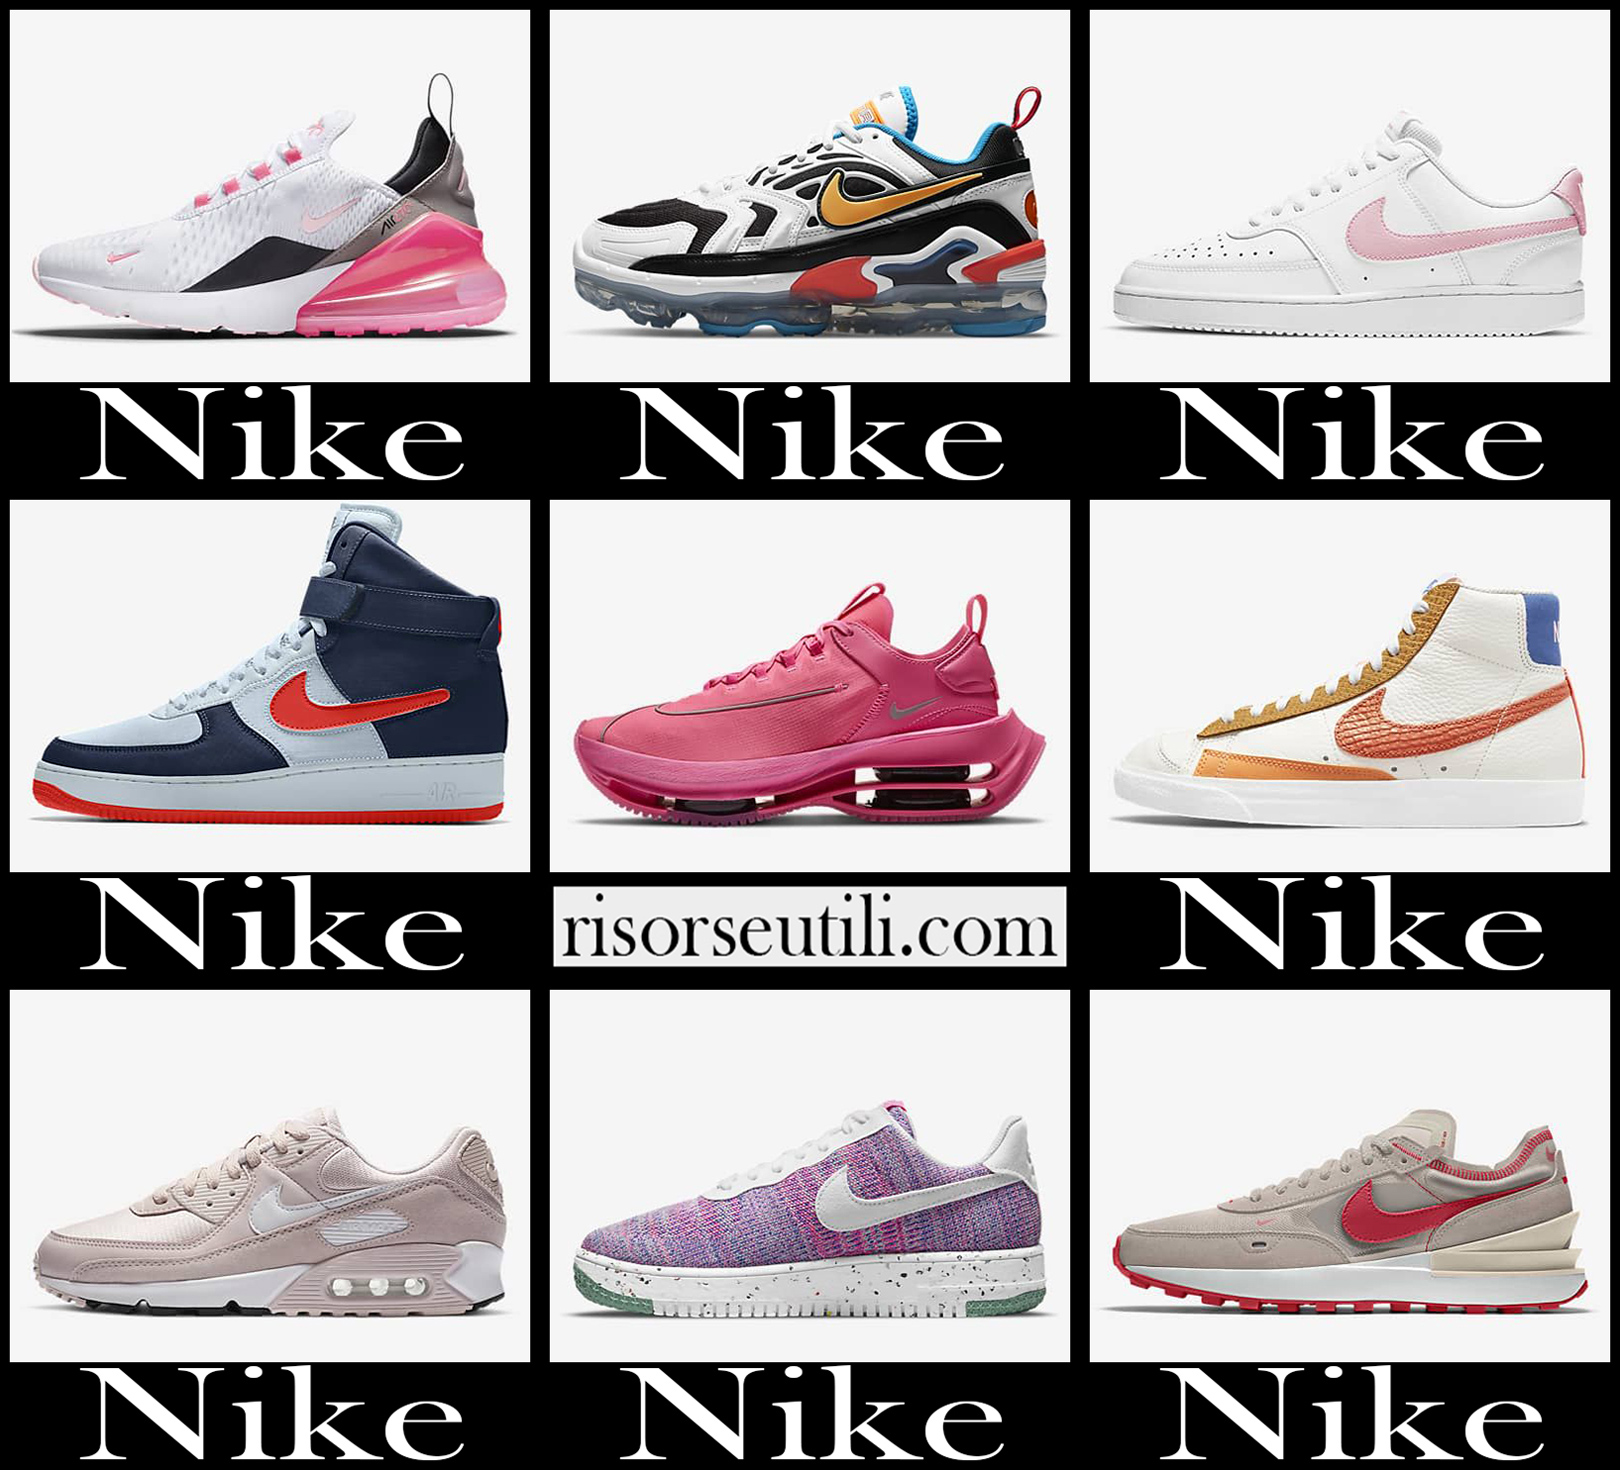 New arrivals Nike sneakers 2021 womens sports shoes